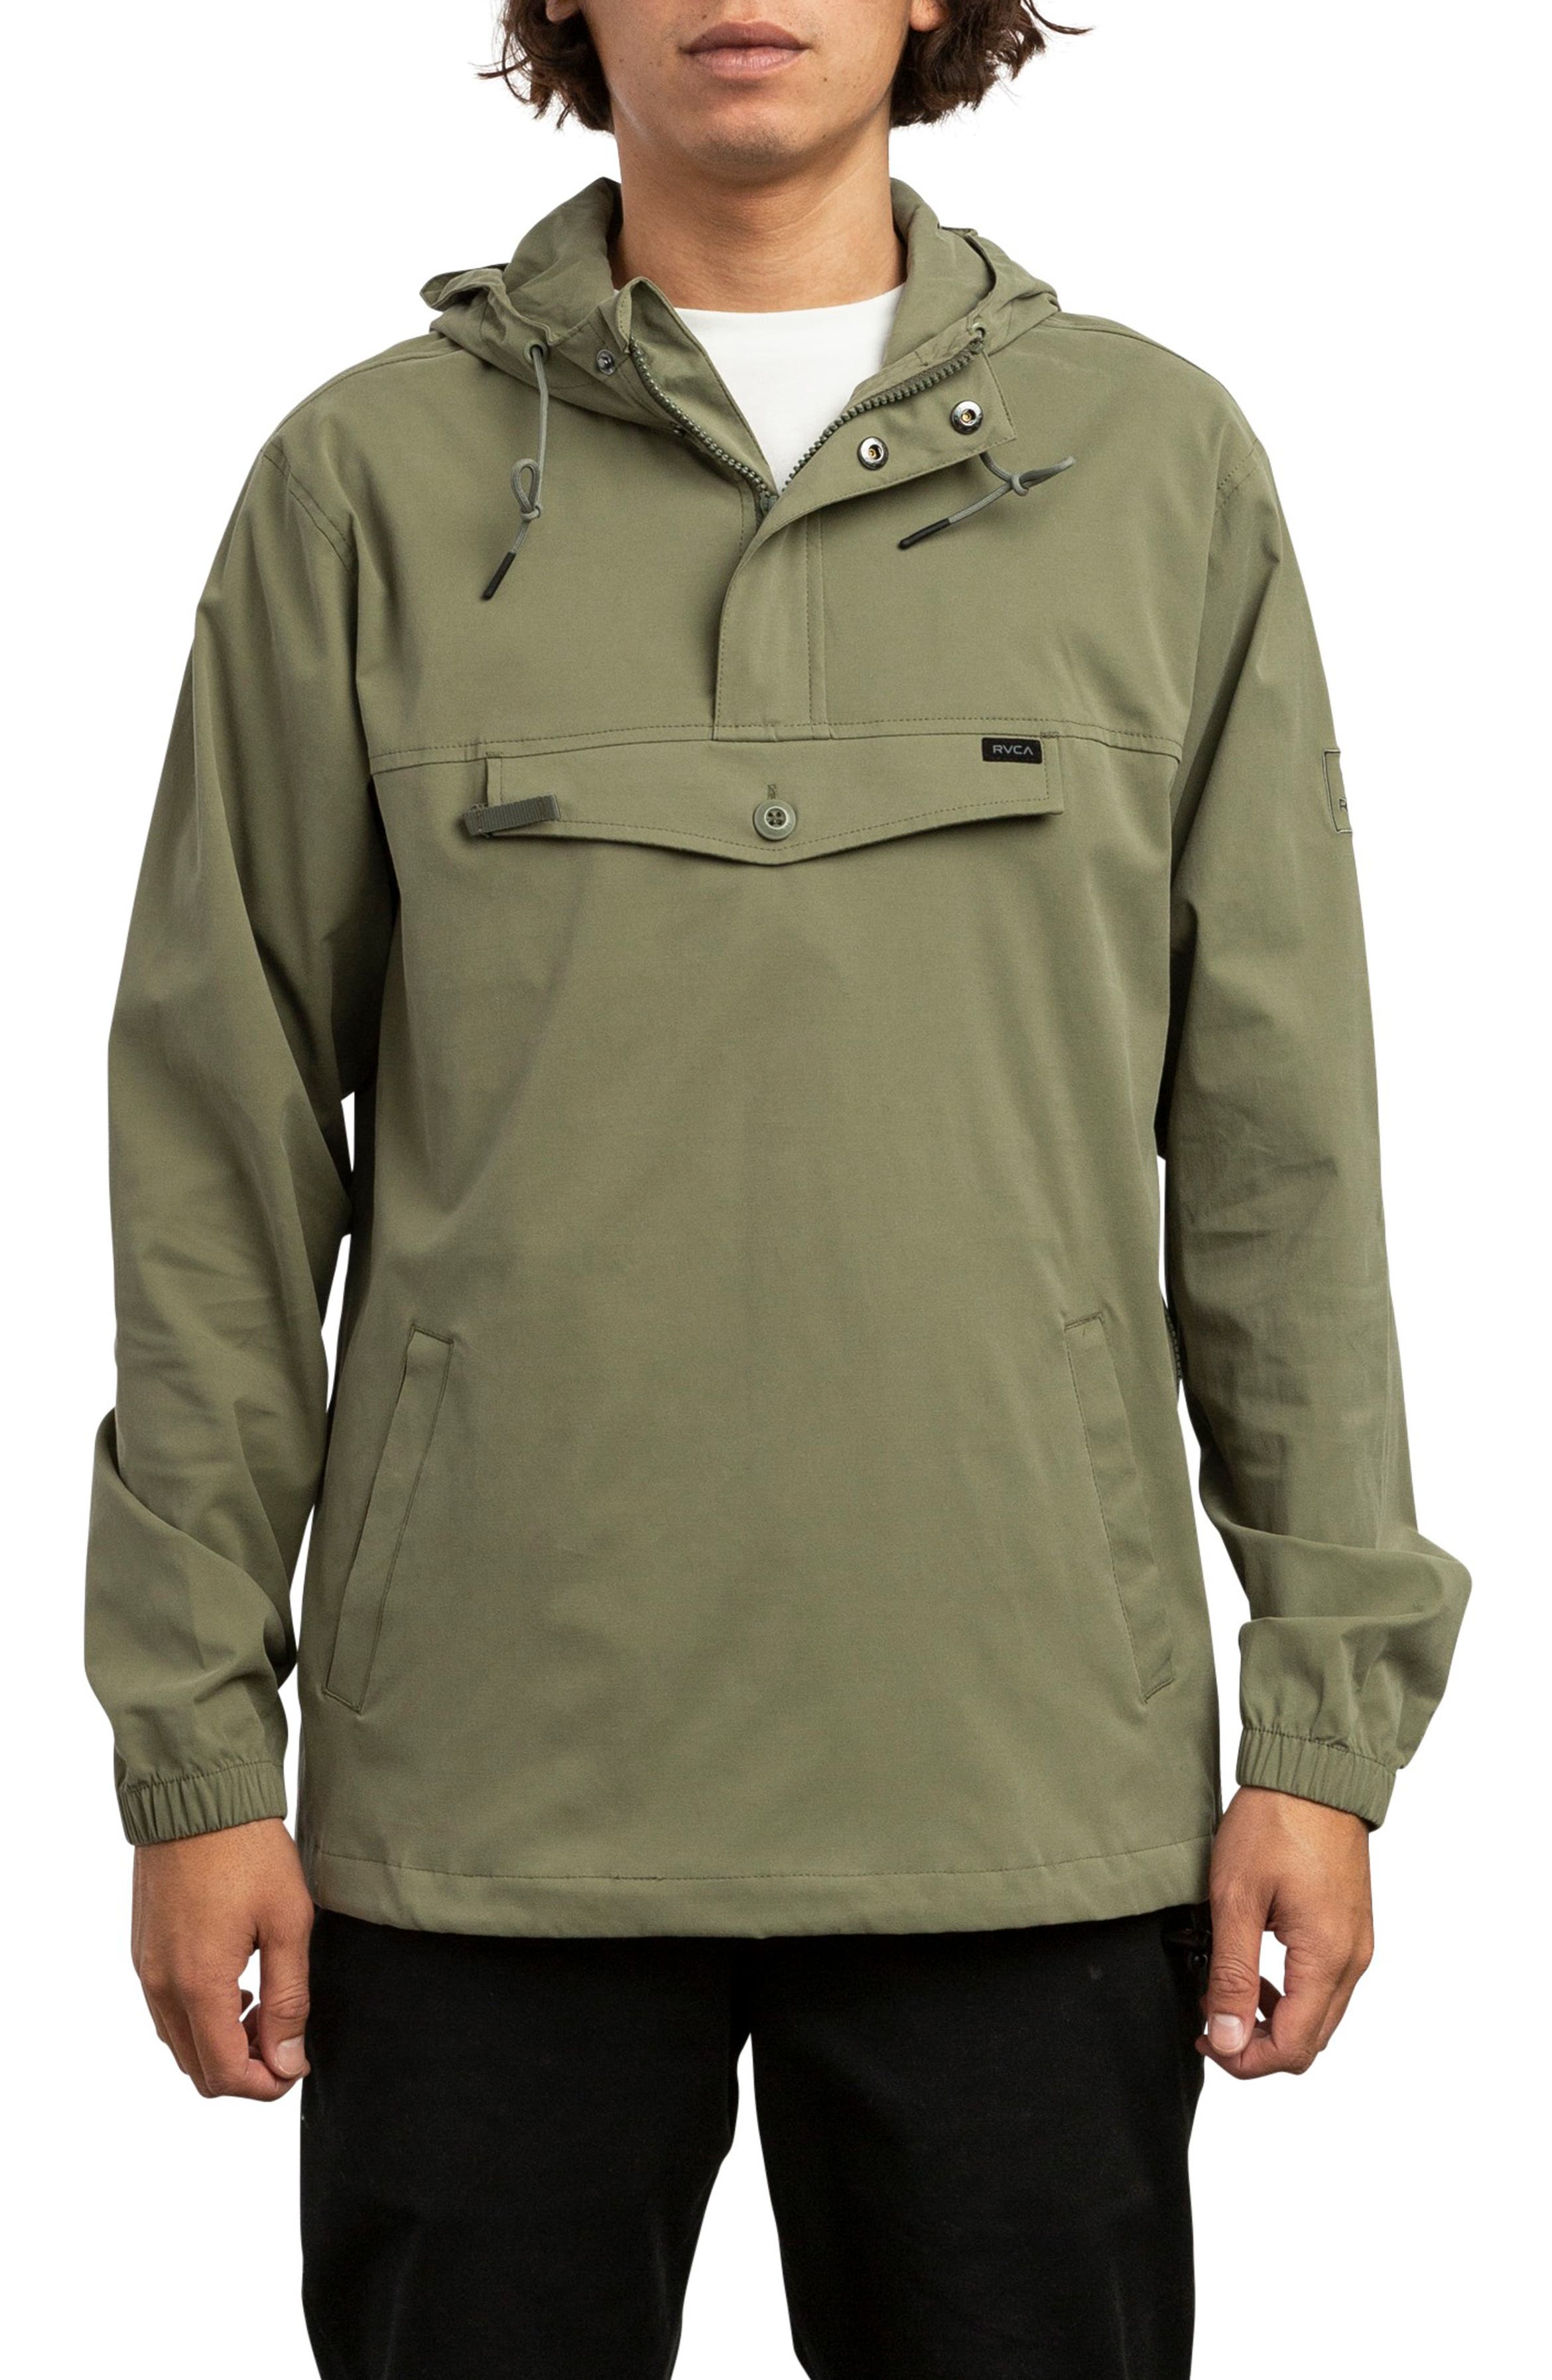 RVCA On Point Anorak | Nordstrom